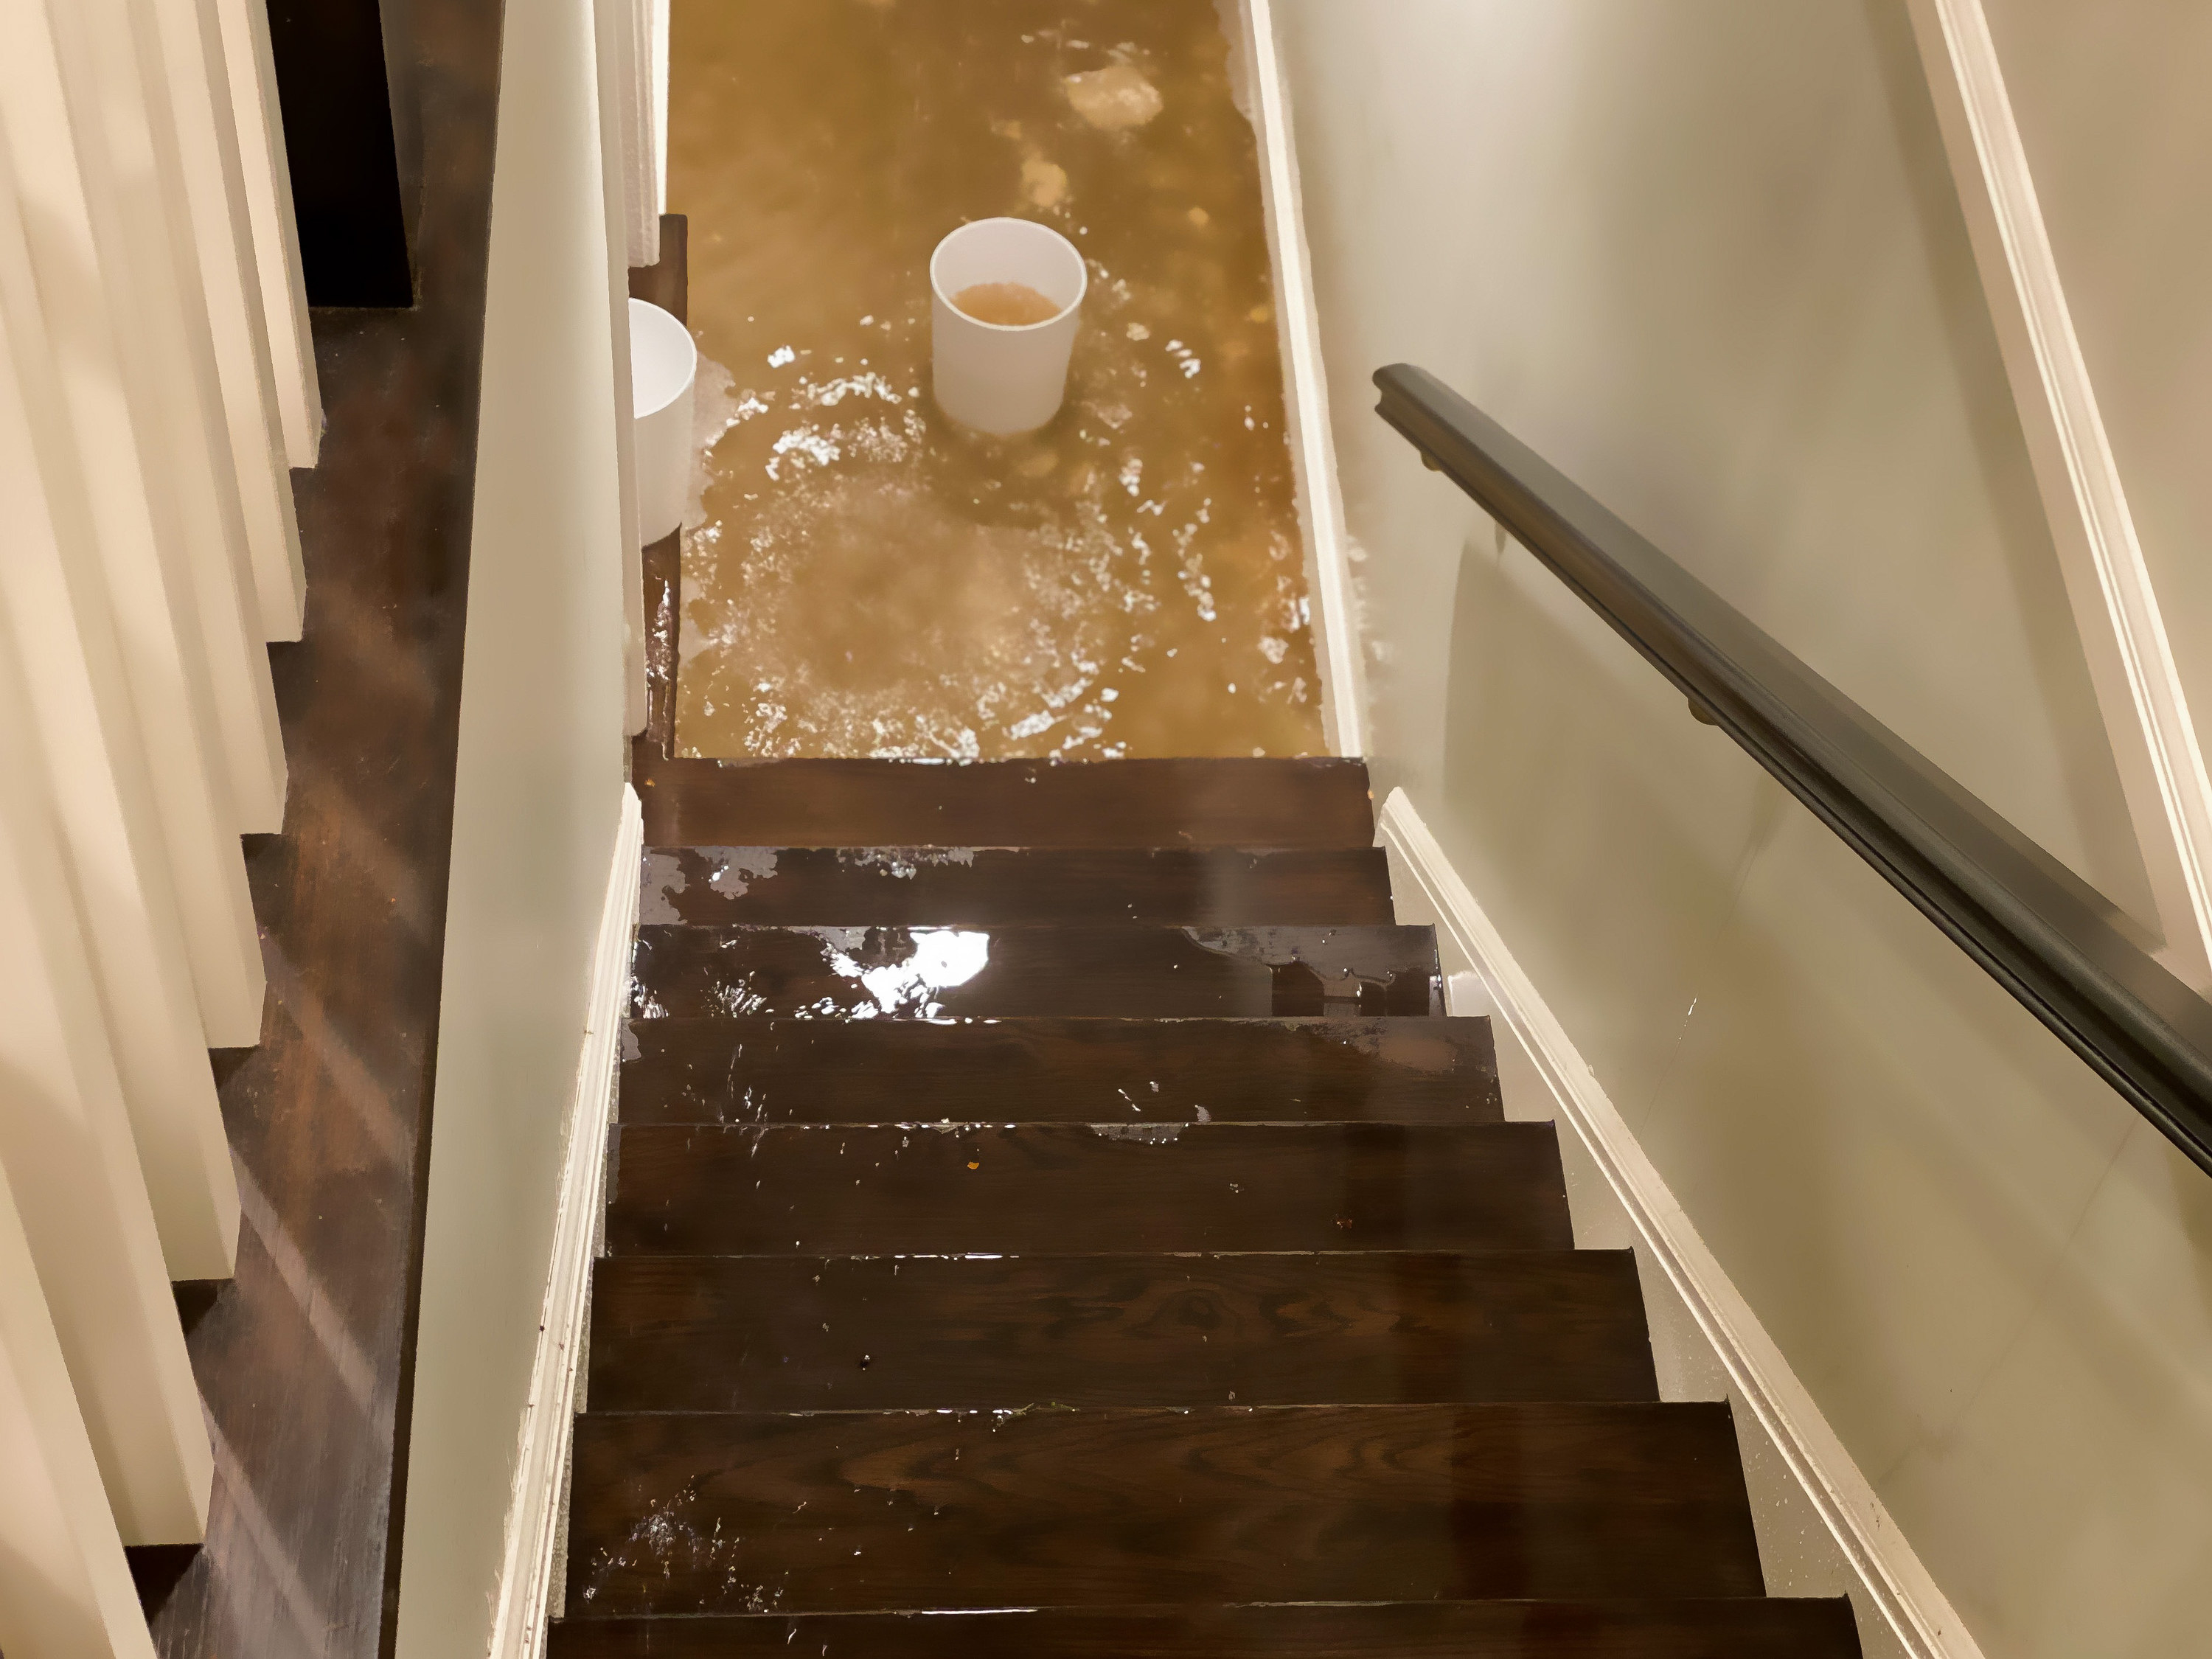 flooding stairs in a home with storm water